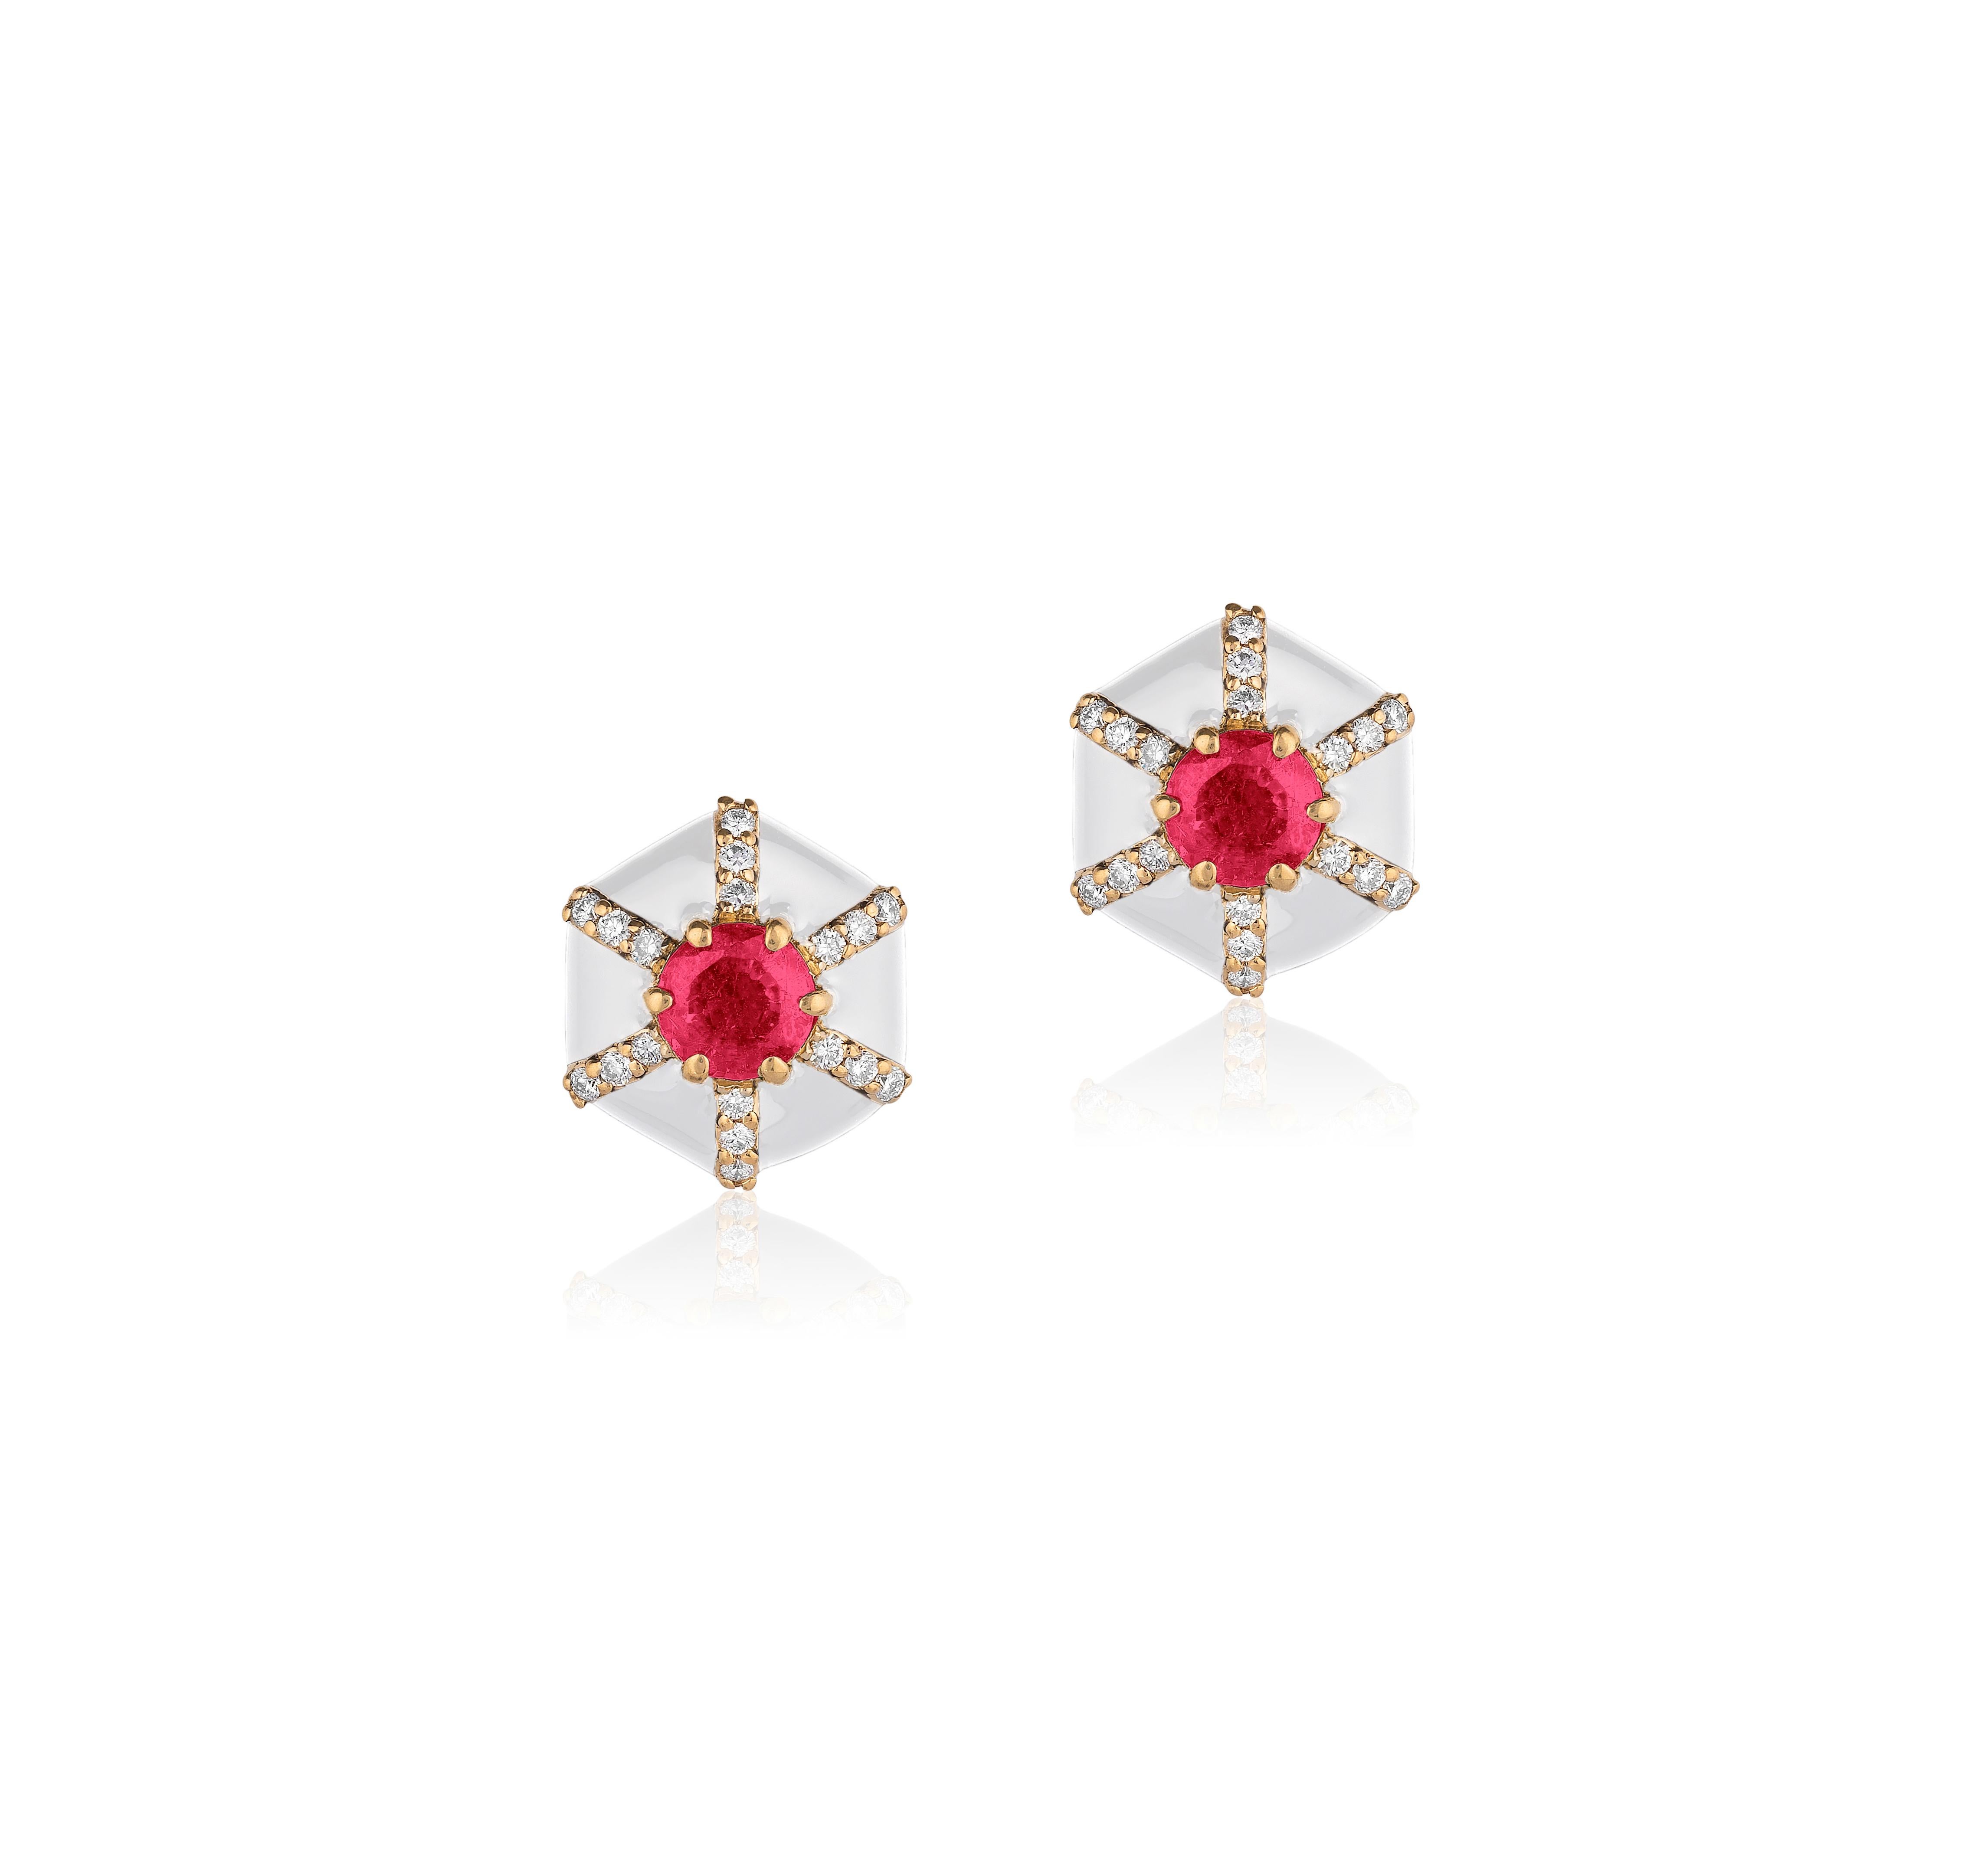 'Queen' Hexagon White Enamel Stud Earrings with Ruby and Diamonds in 18K Yellow Gold.
Stone Size-5 x 3 mm 
Gemstone Approx Wt: Ruby- 0.67 Carats
Diamonds: G-H / VS; Approx. Wt: 0.14 Carats